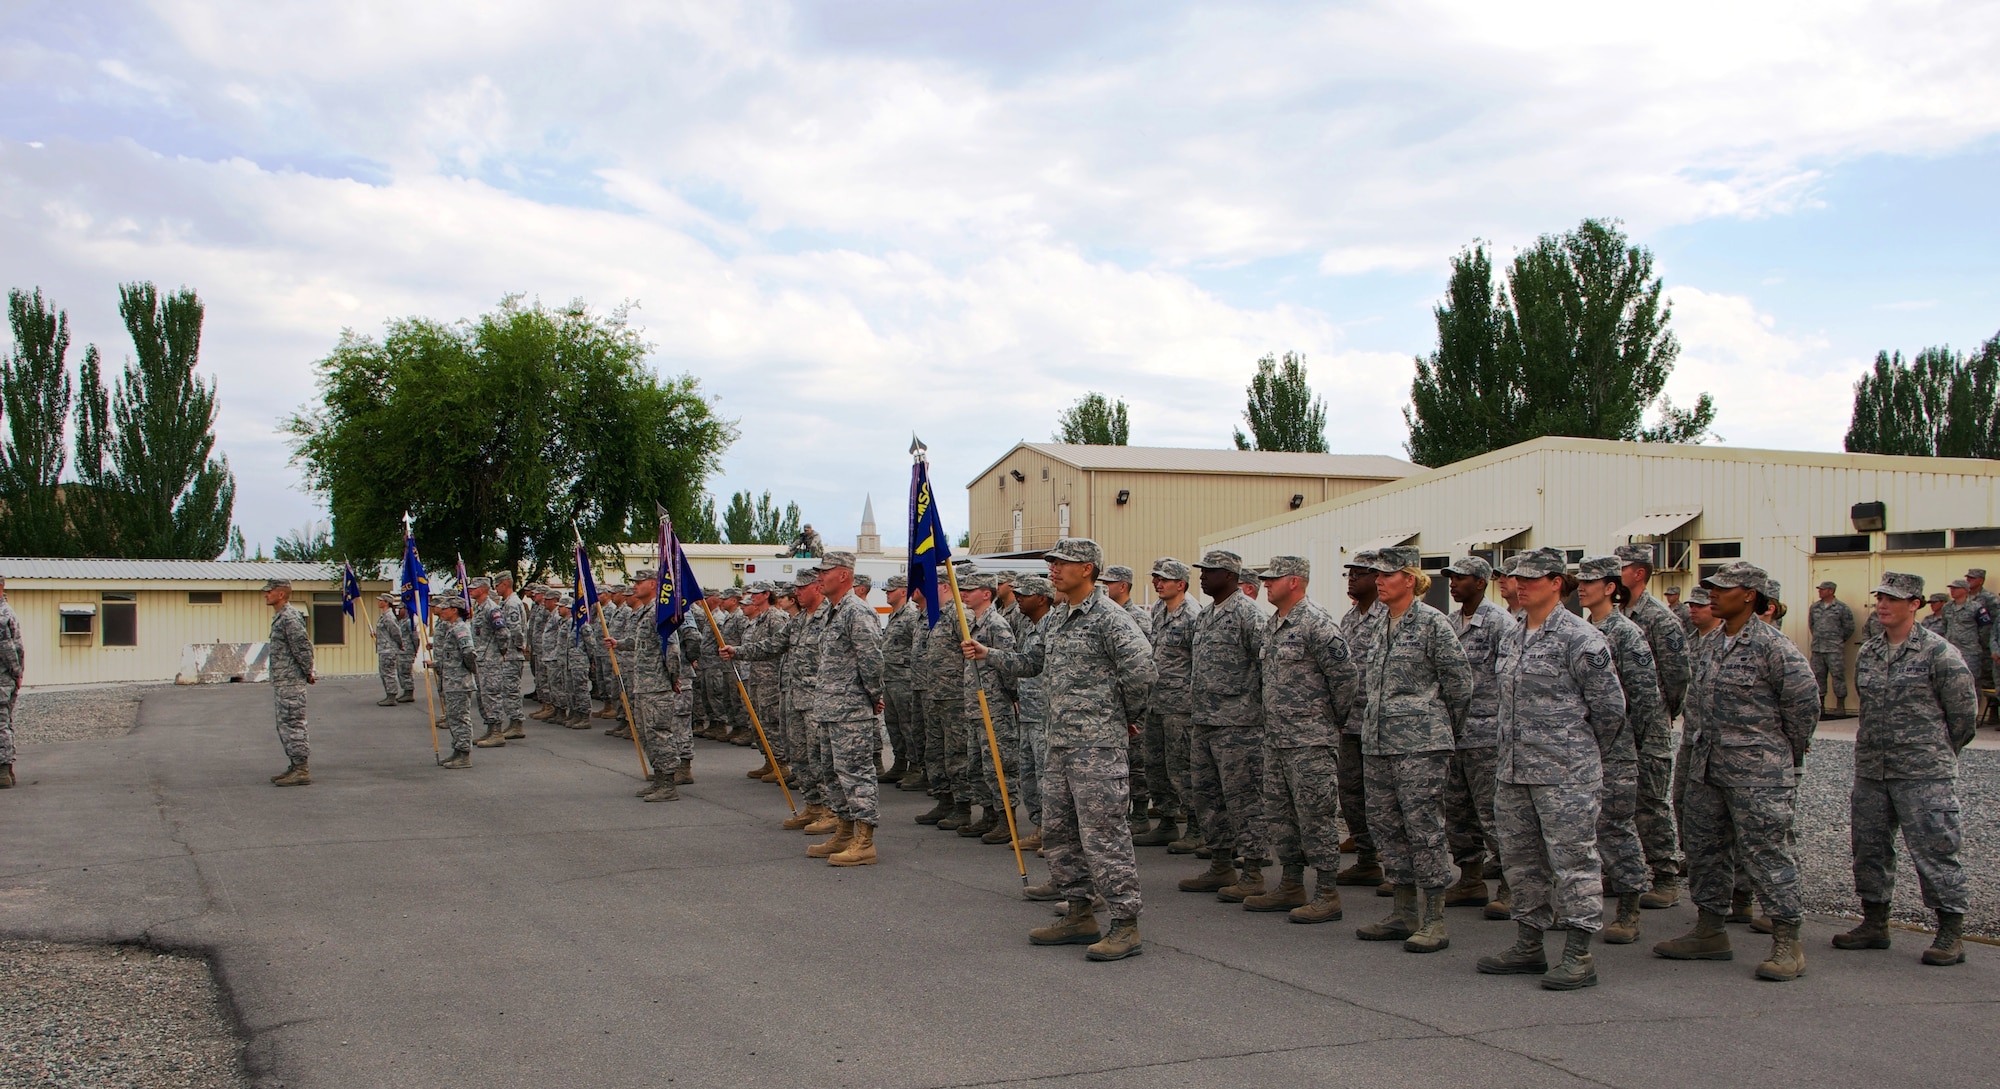 Airmen stand at parade rest during the 376th Air Expeditionary Wing inactivation ceremony June 3, 2014, at Transit Center at Manas, Kyrgyzstan. For more than 12 years, the American military has operated out of Transit Center at Manas. It served as the premier transportation and logistics hub supporting operations in Afghanistan. (Courtesy Photo/Capt. Cory O'Brien) 